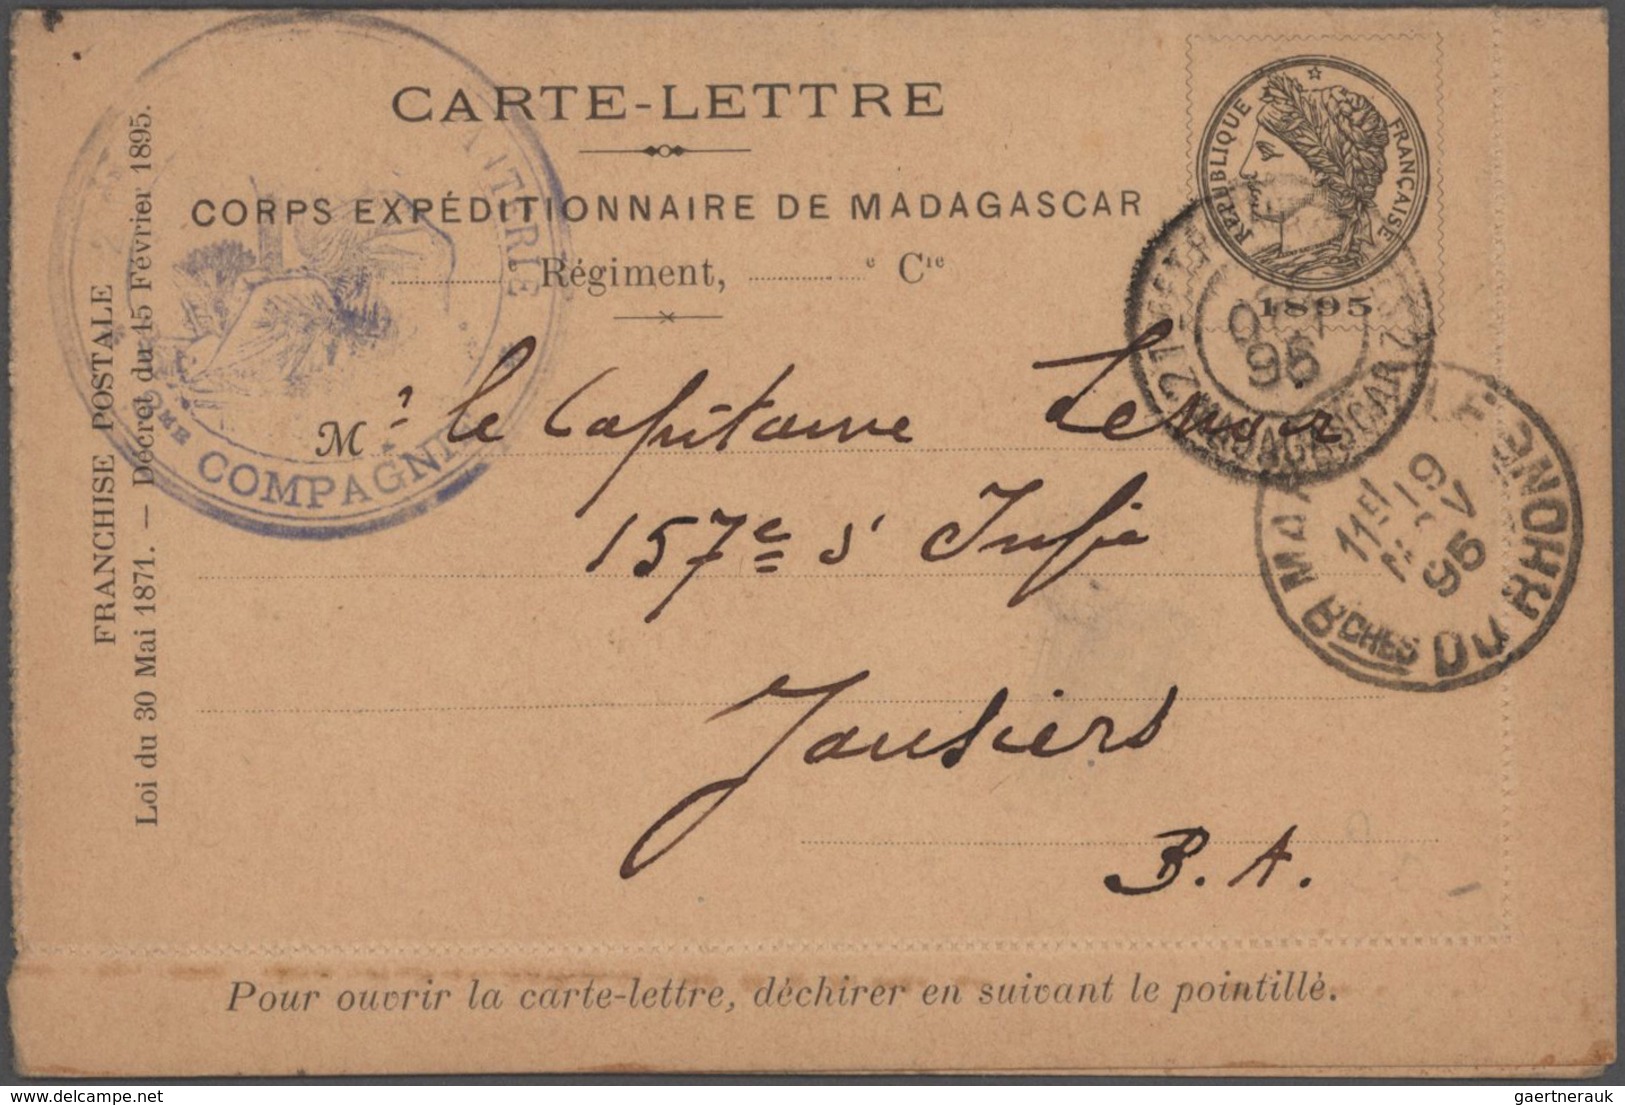 Französische Kolonien: 1890/2005 (ca.), French colonies/French area, holding of apprx. 177 covers/ca